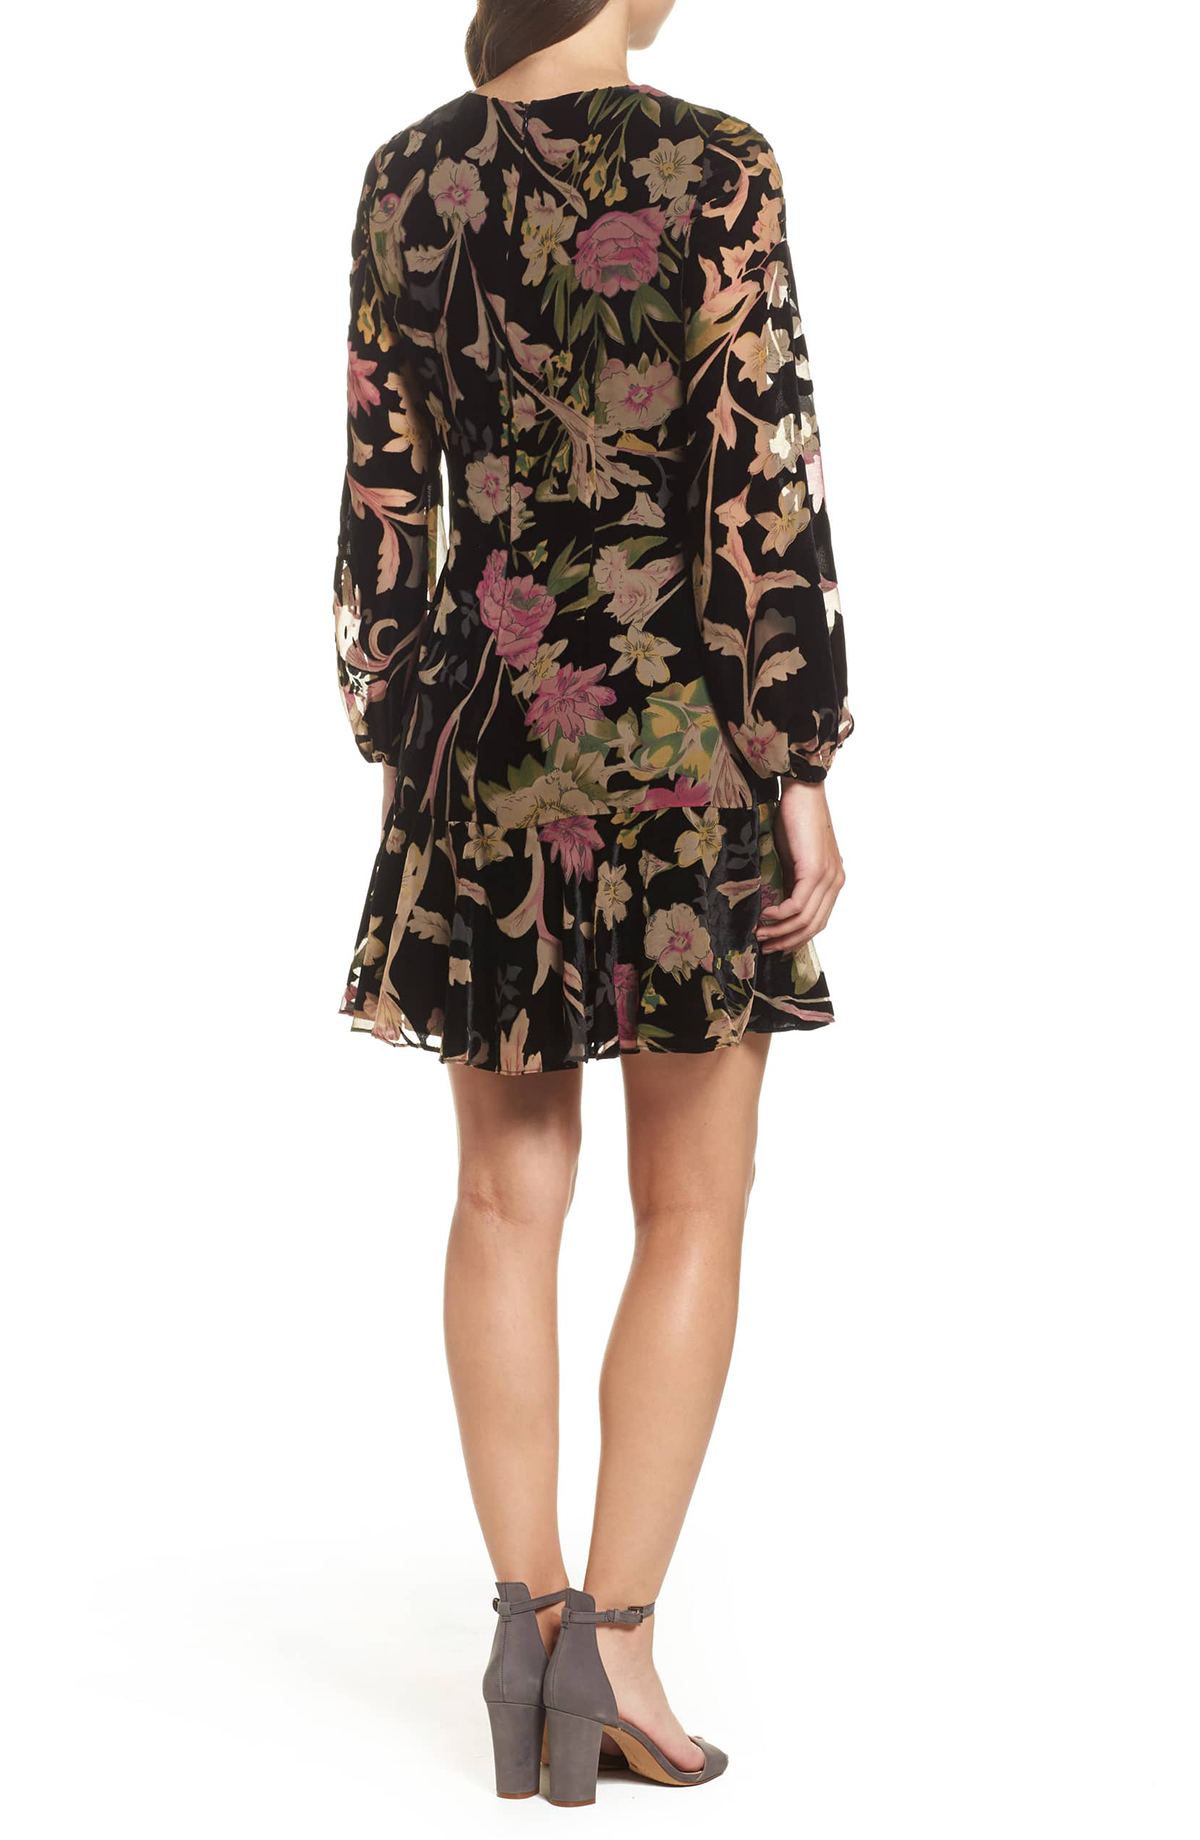 This 40% off Floral Velvet Dress Has Us Loving the Colder Weather